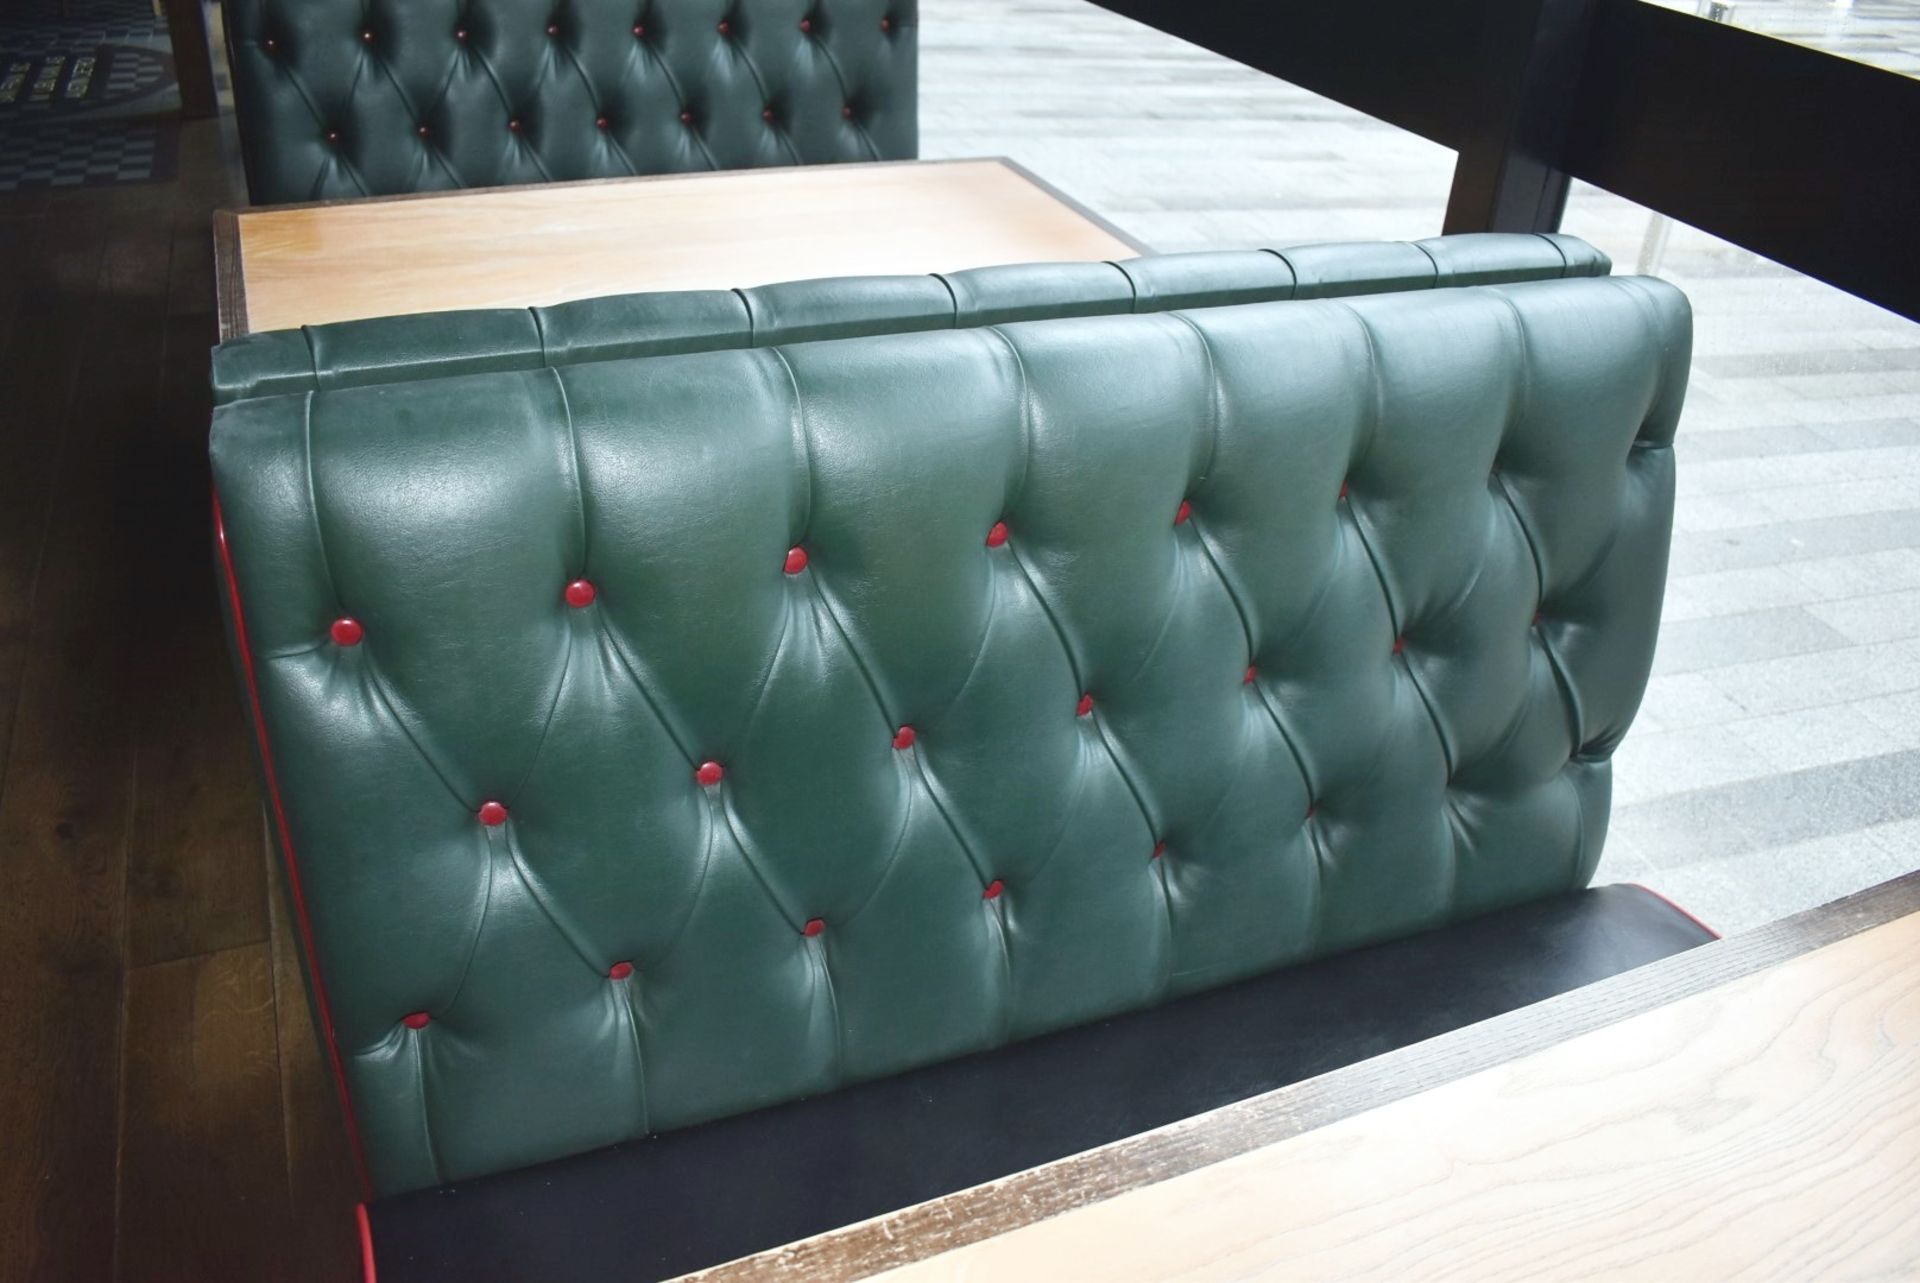 4 x Sections of Restaurant Double Booth Seating - Sits Up to 12 Persons - Green & Black Upholstery - Image 14 of 24